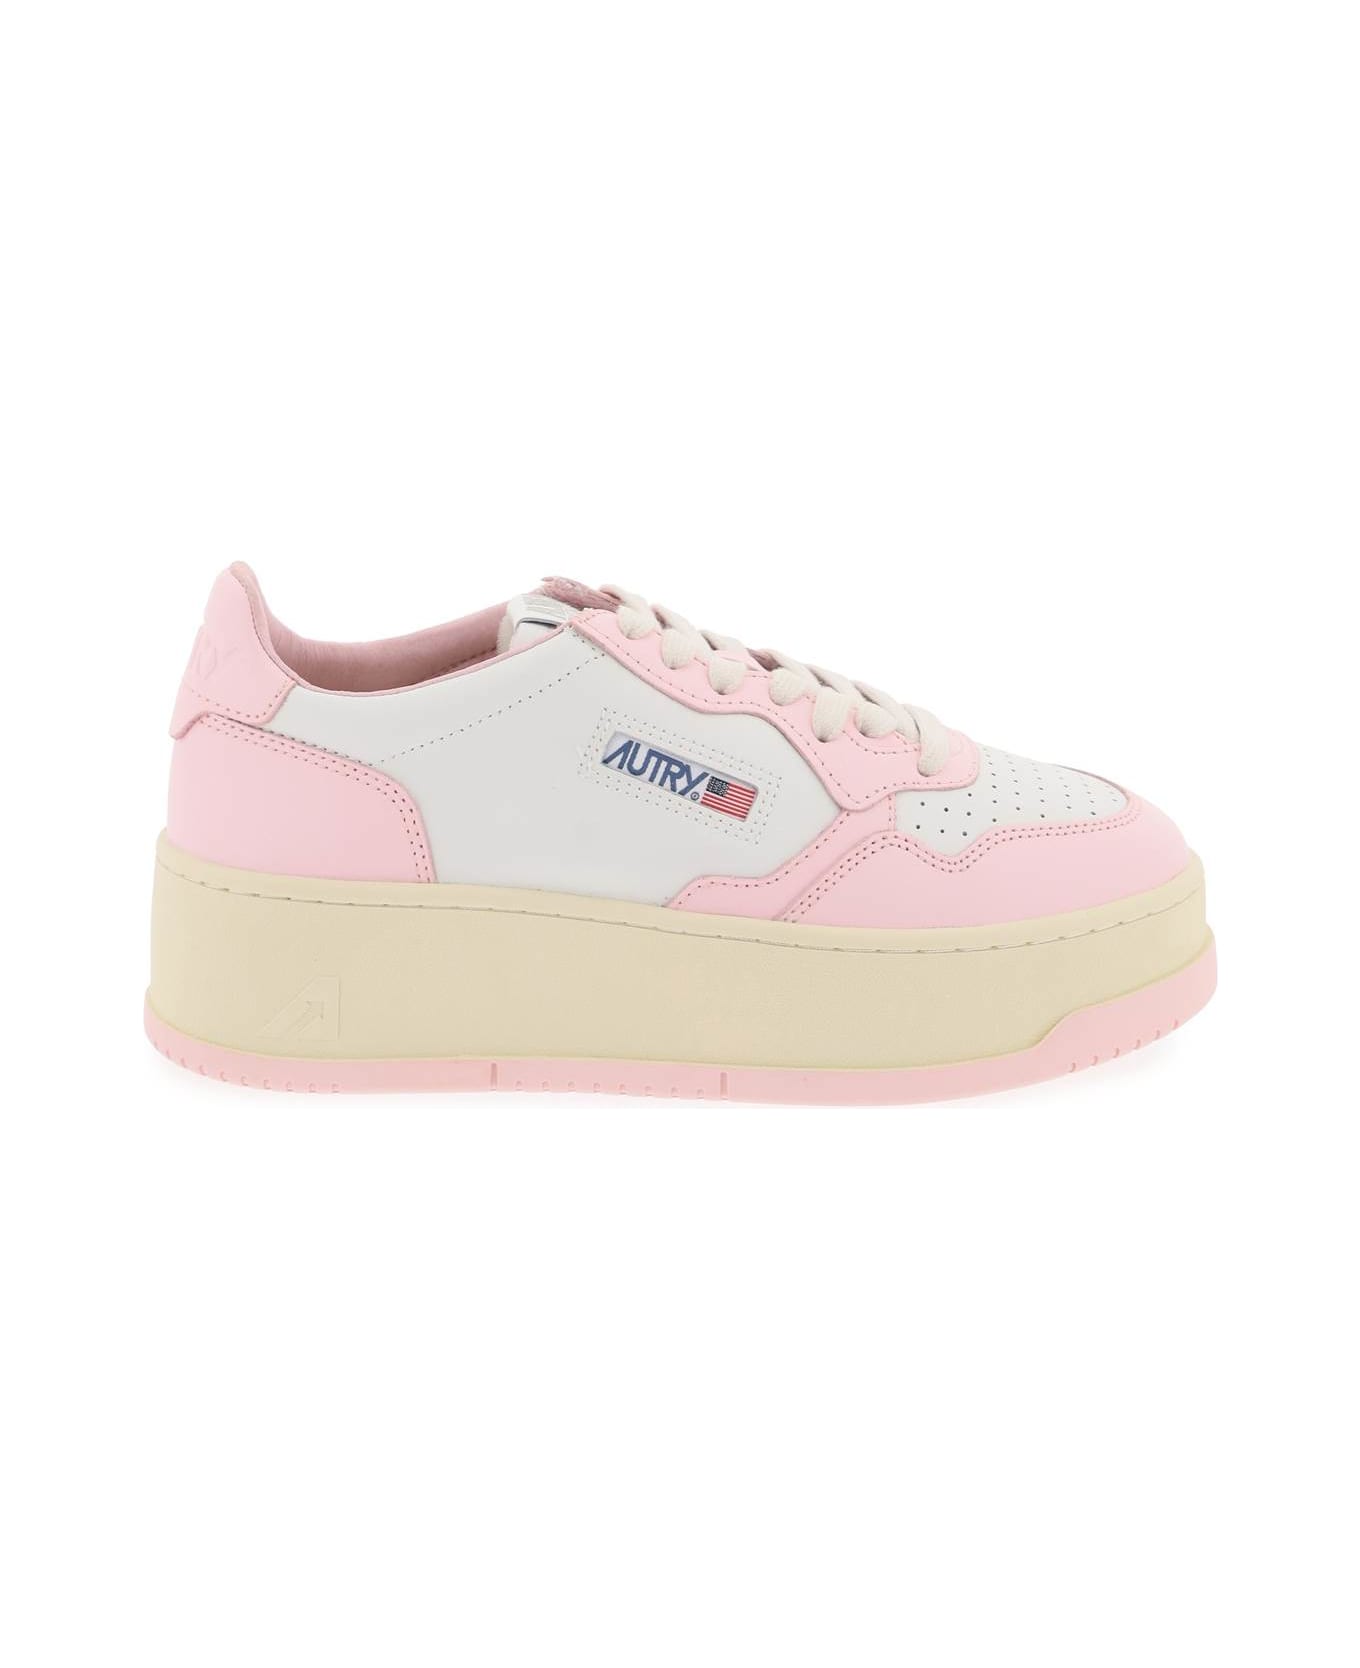 Autry Medalist Low Sneakers - Rosa ウェッジシューズ